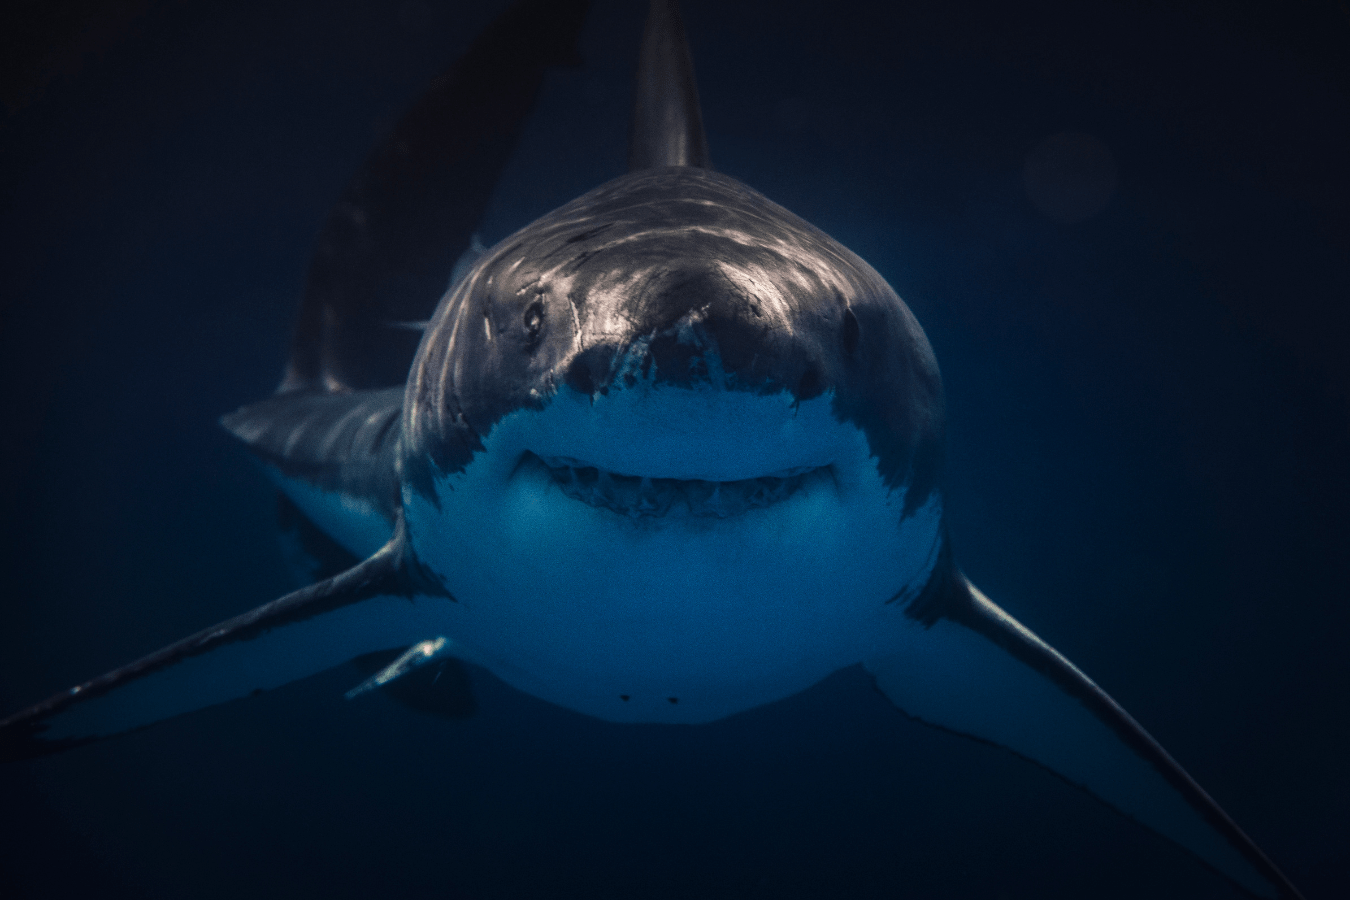 Dream About Sharks: What Does It Mean?